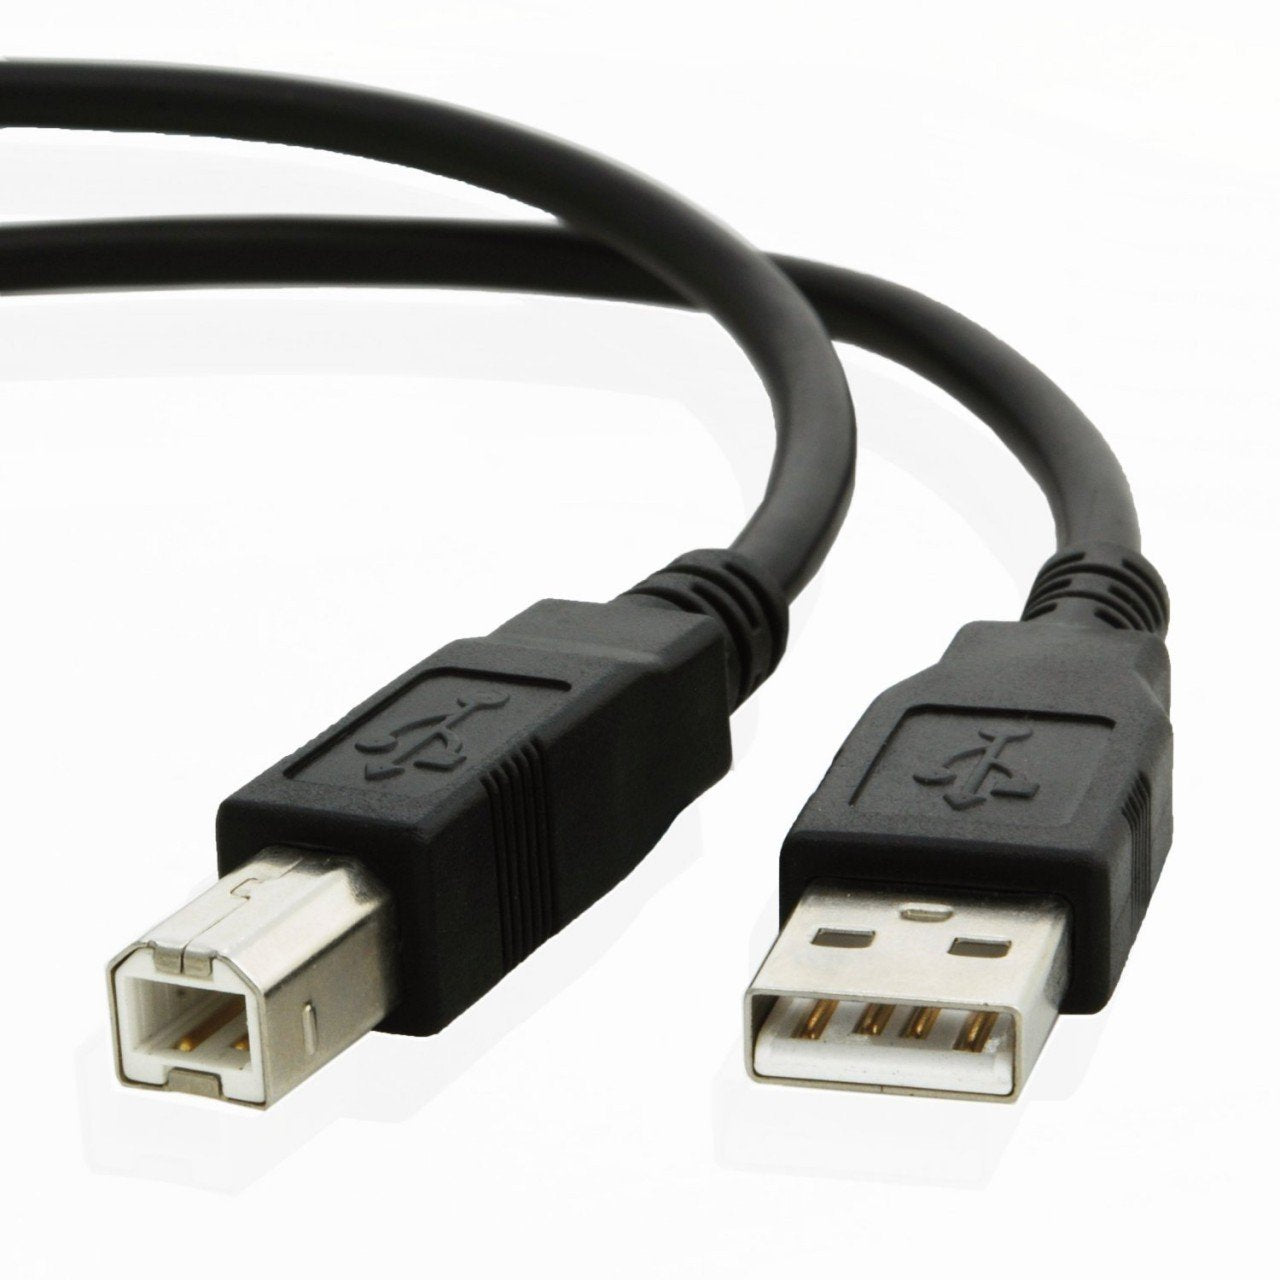 USB cable for Epson TM-T70II